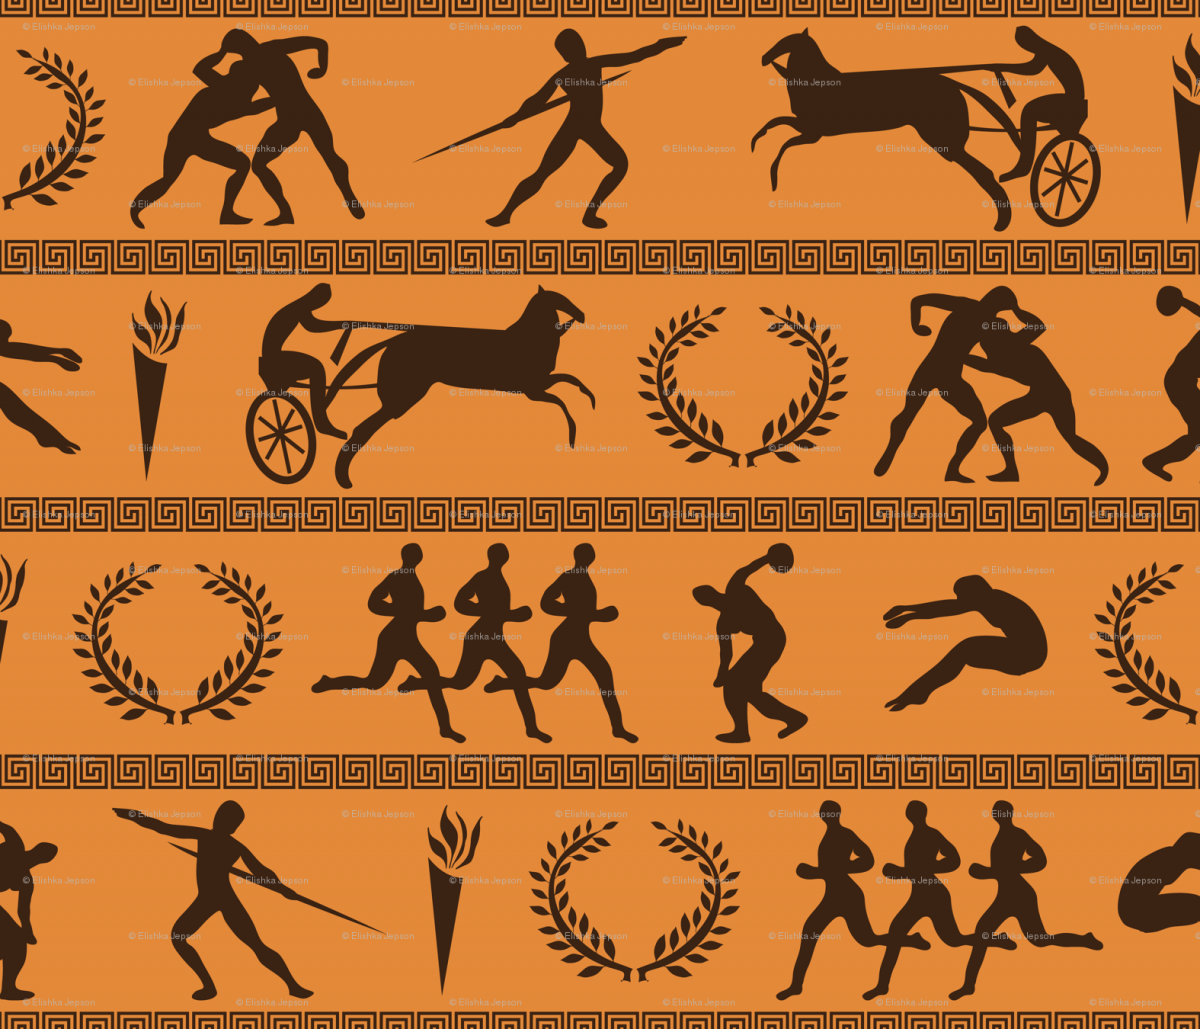 ancient-greece-olympics-facts-when-did-the-olympics-start